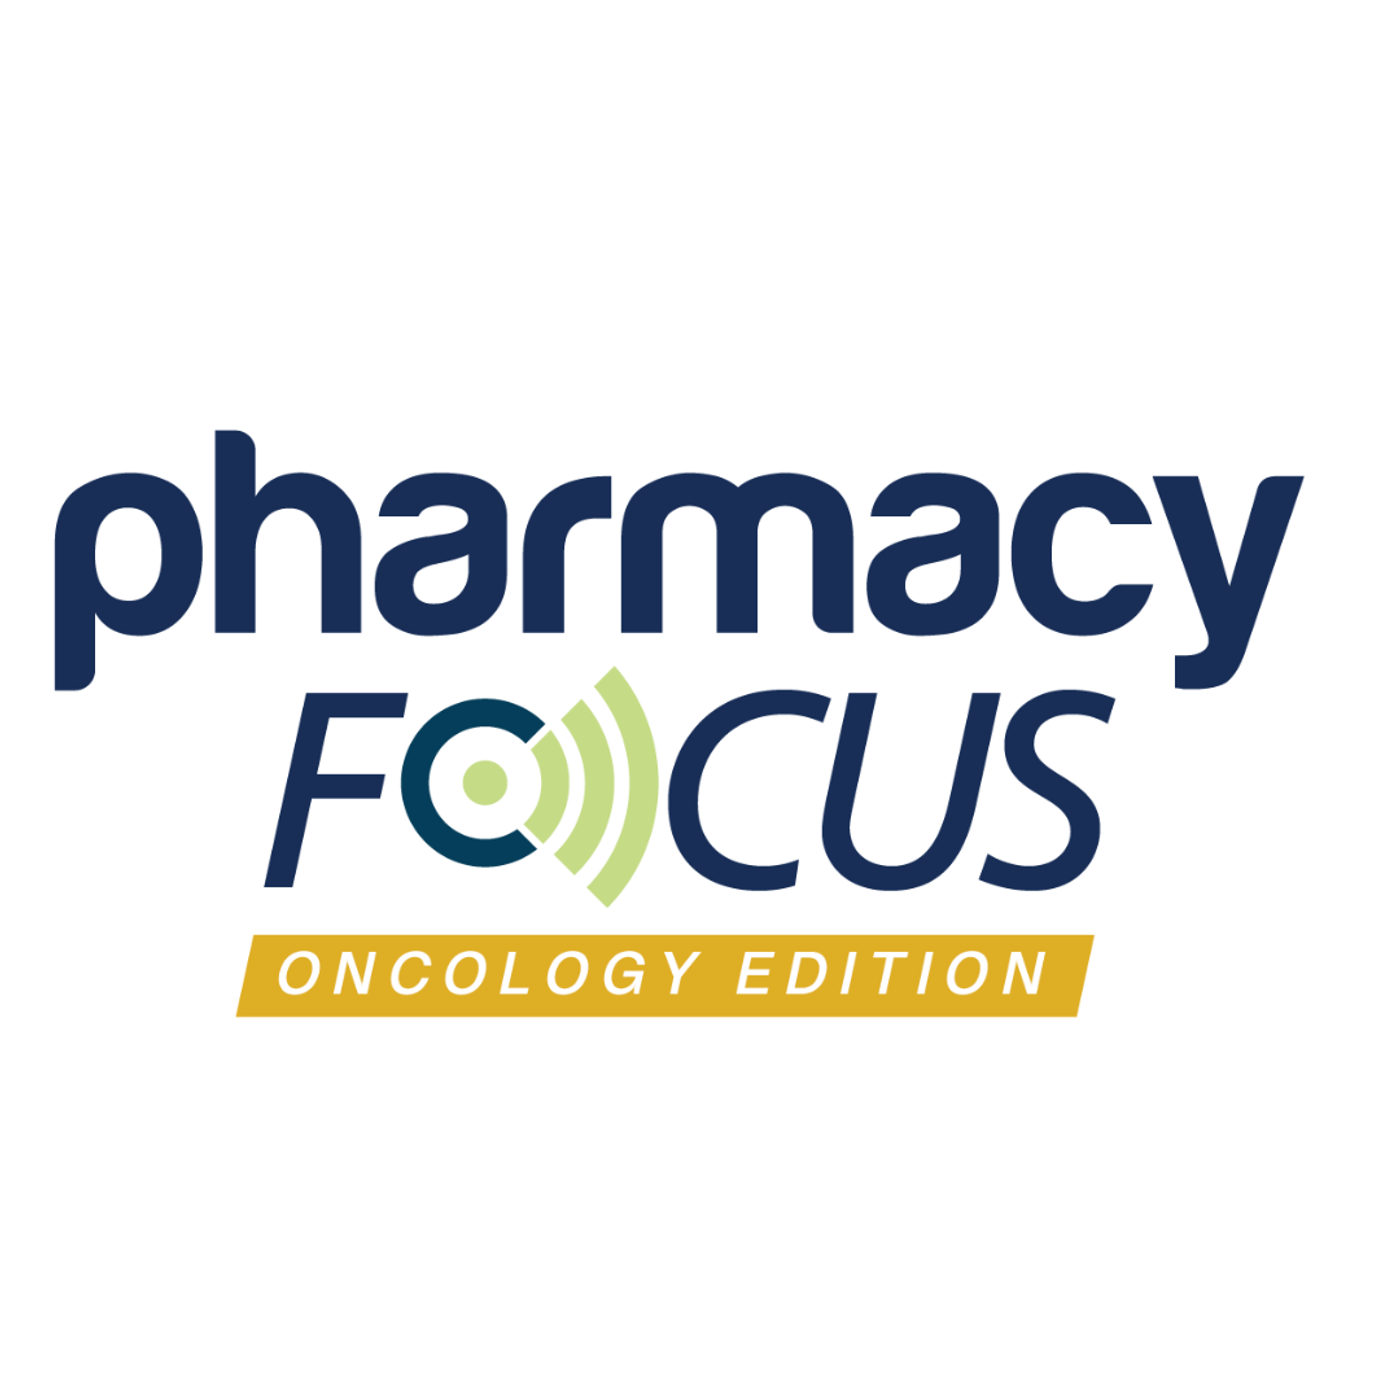 S2 Ep17: Pharmacy Focus: Oncology Edition- Integrating Oncology Pharmacists into Multidisciplinary Care Teams for Improved Patient Outcomes